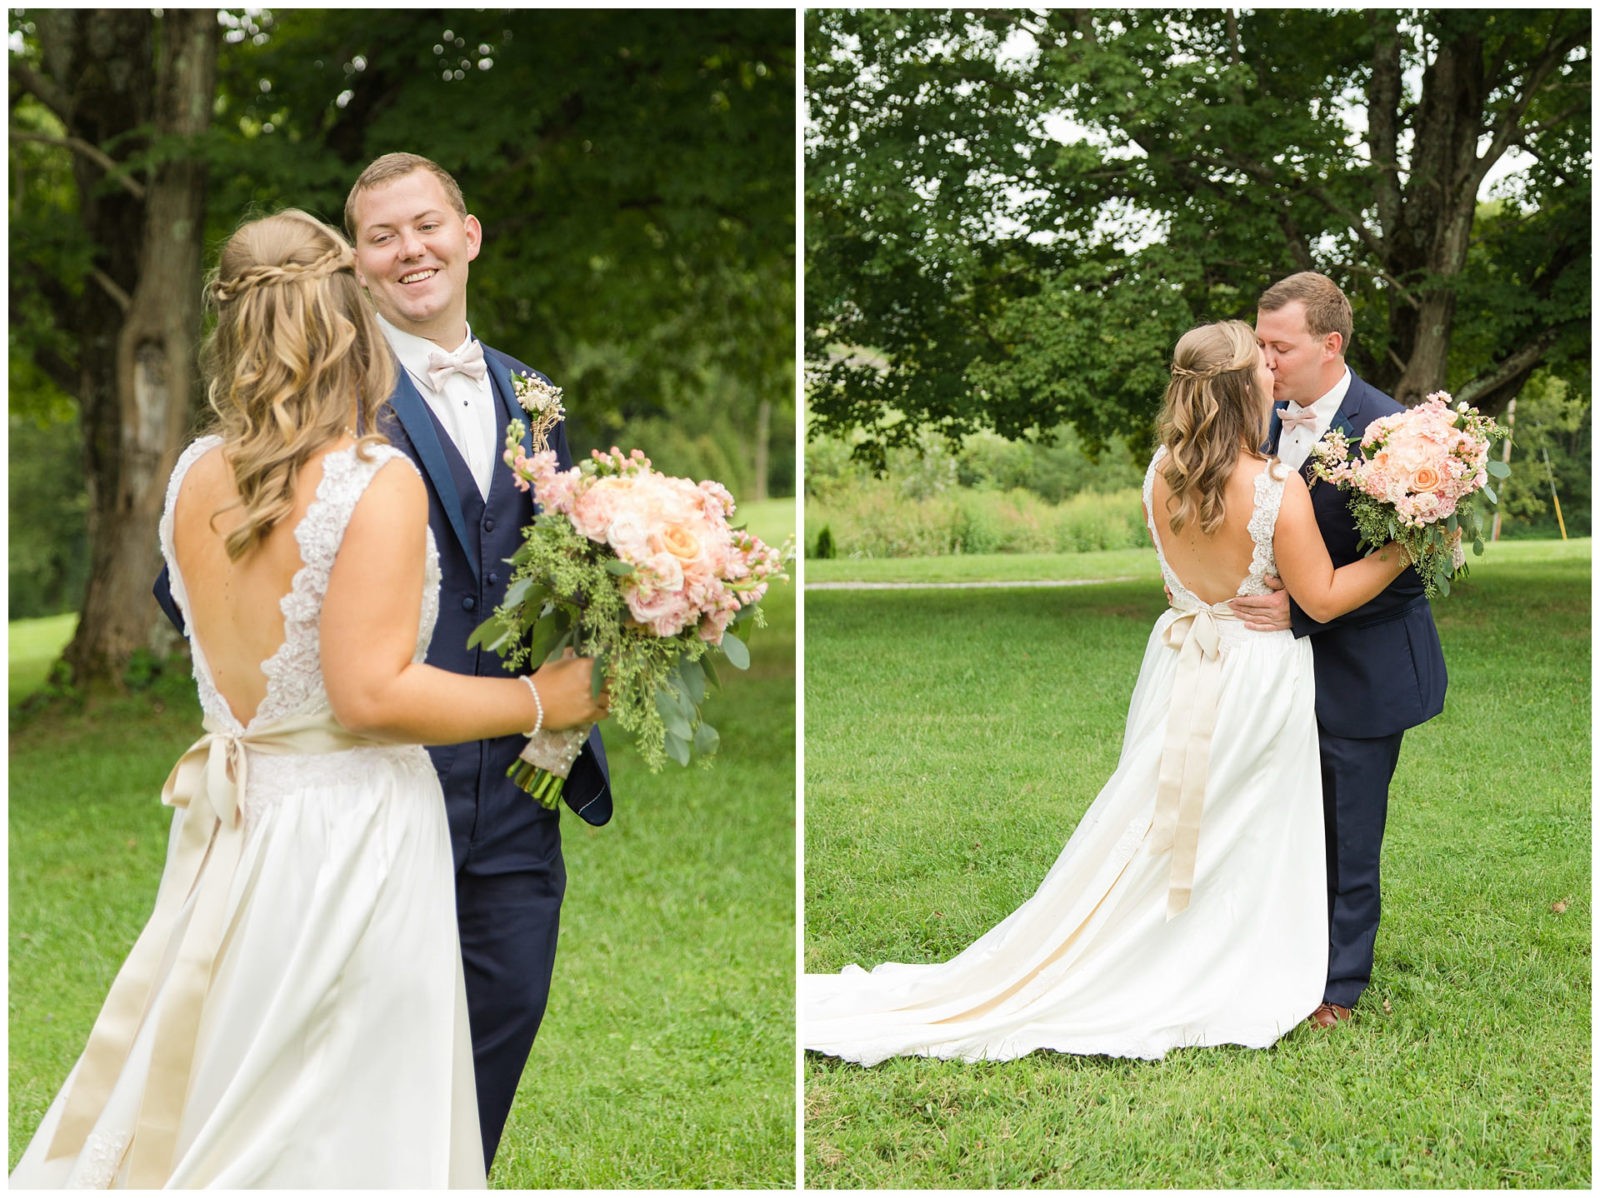 Wedding Bride and Groom Photos at the Barn at McCall Springs in Lawrenceburg, Kentucky.